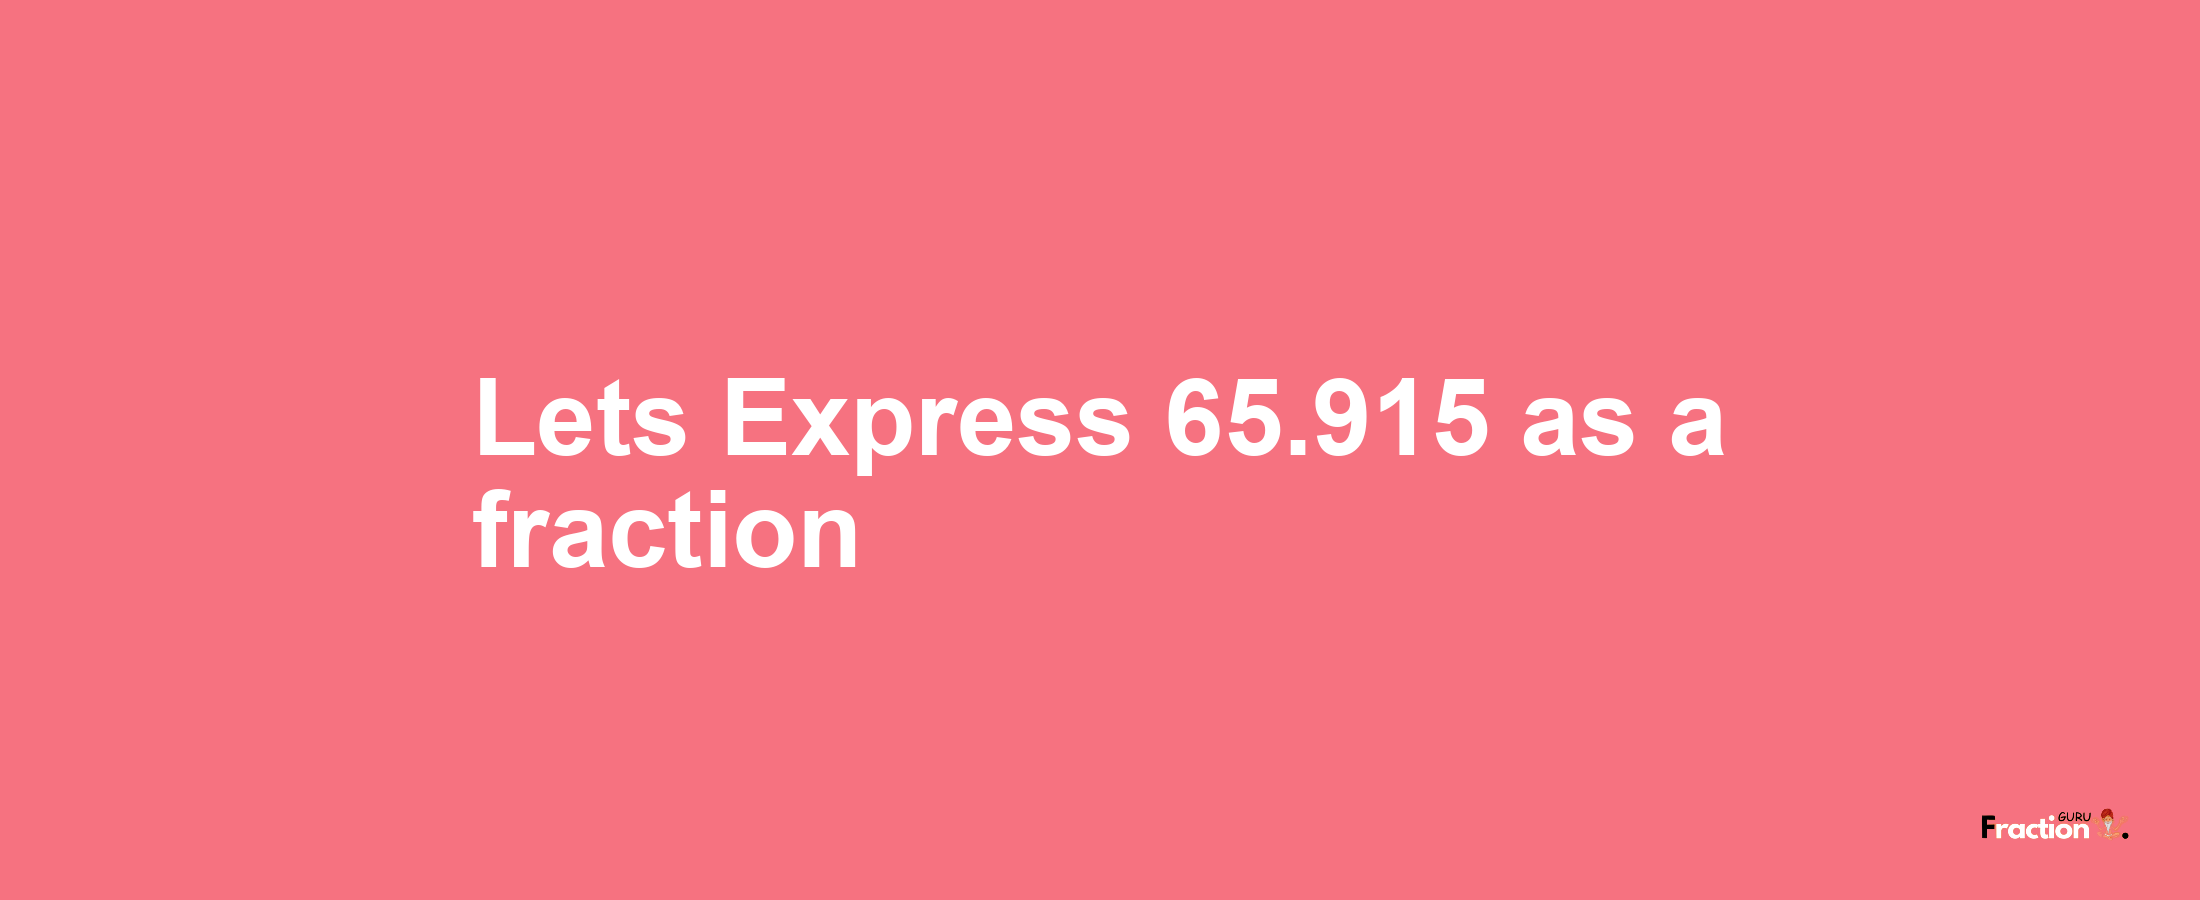 Lets Express 65.915 as afraction